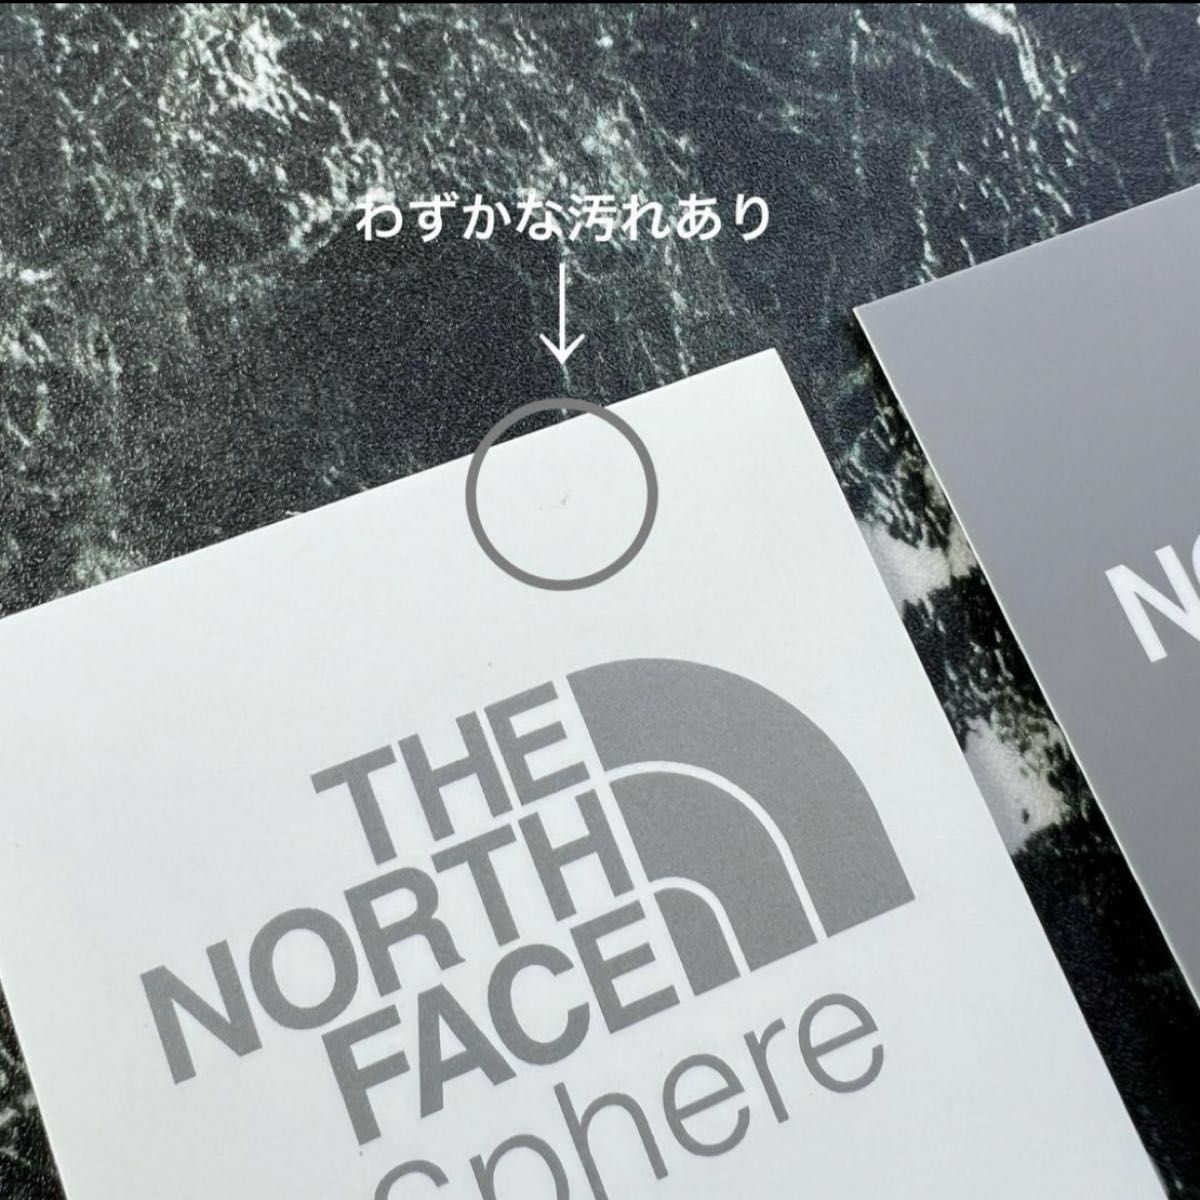 THE NORTH FACE Sphere (原宿) ステッカー2枚セットノース